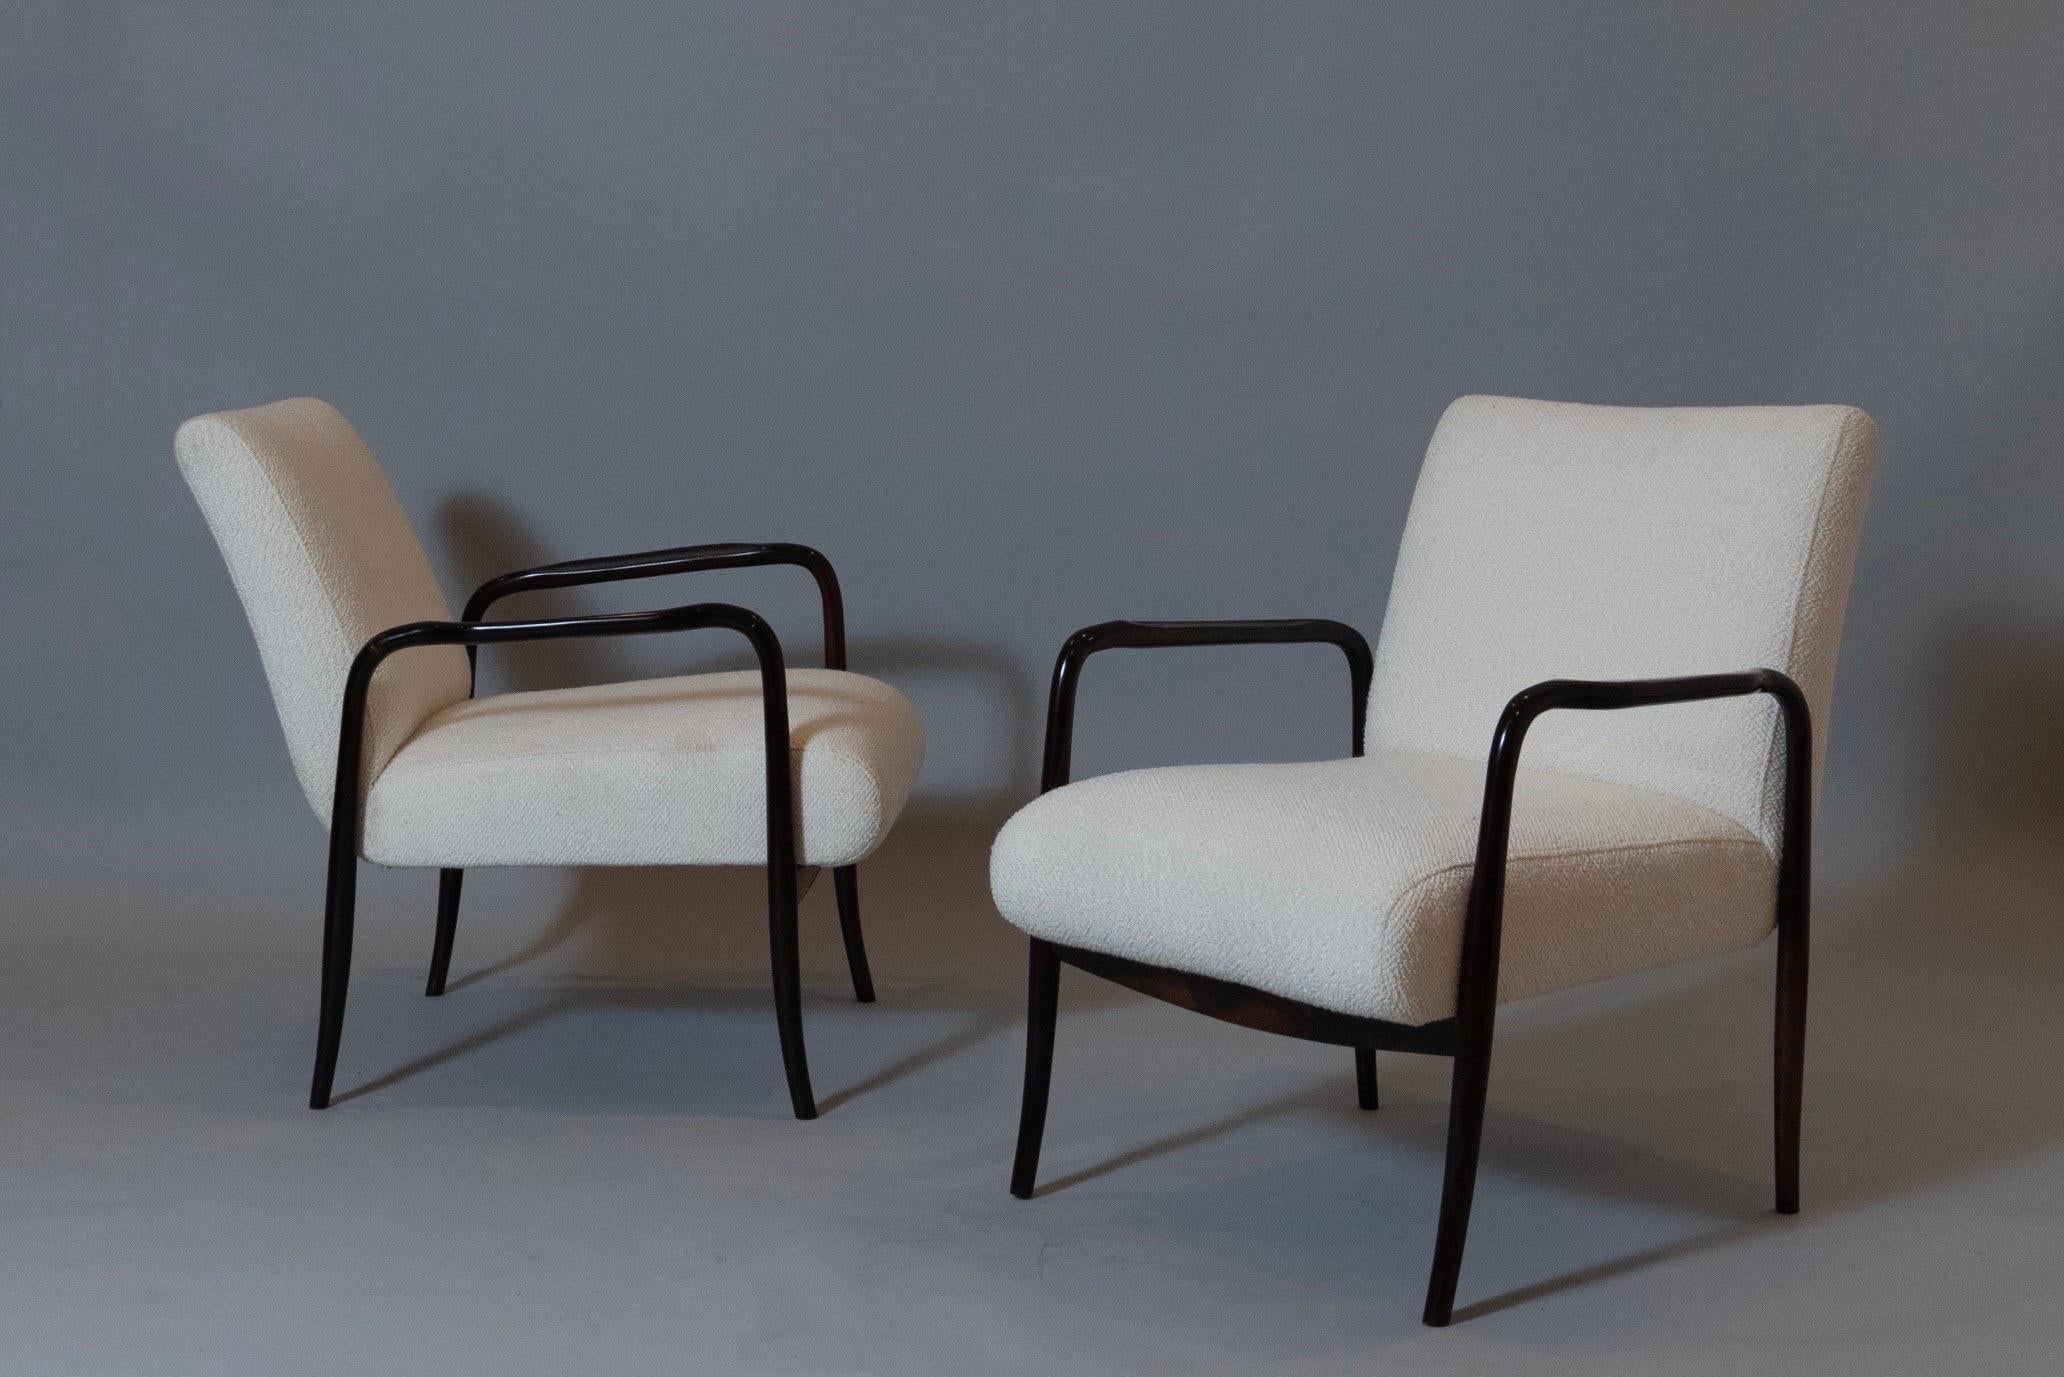 Joaquim Tenreiro (1906 - 1992) 

A stunning pair of armchairs of exceptional lightness and elegance, in jacaranda, by pioneer of Brazilian modernism Joaquim Tenreiro. With their slim profile and beautifully carved, curved, and indented frames, these